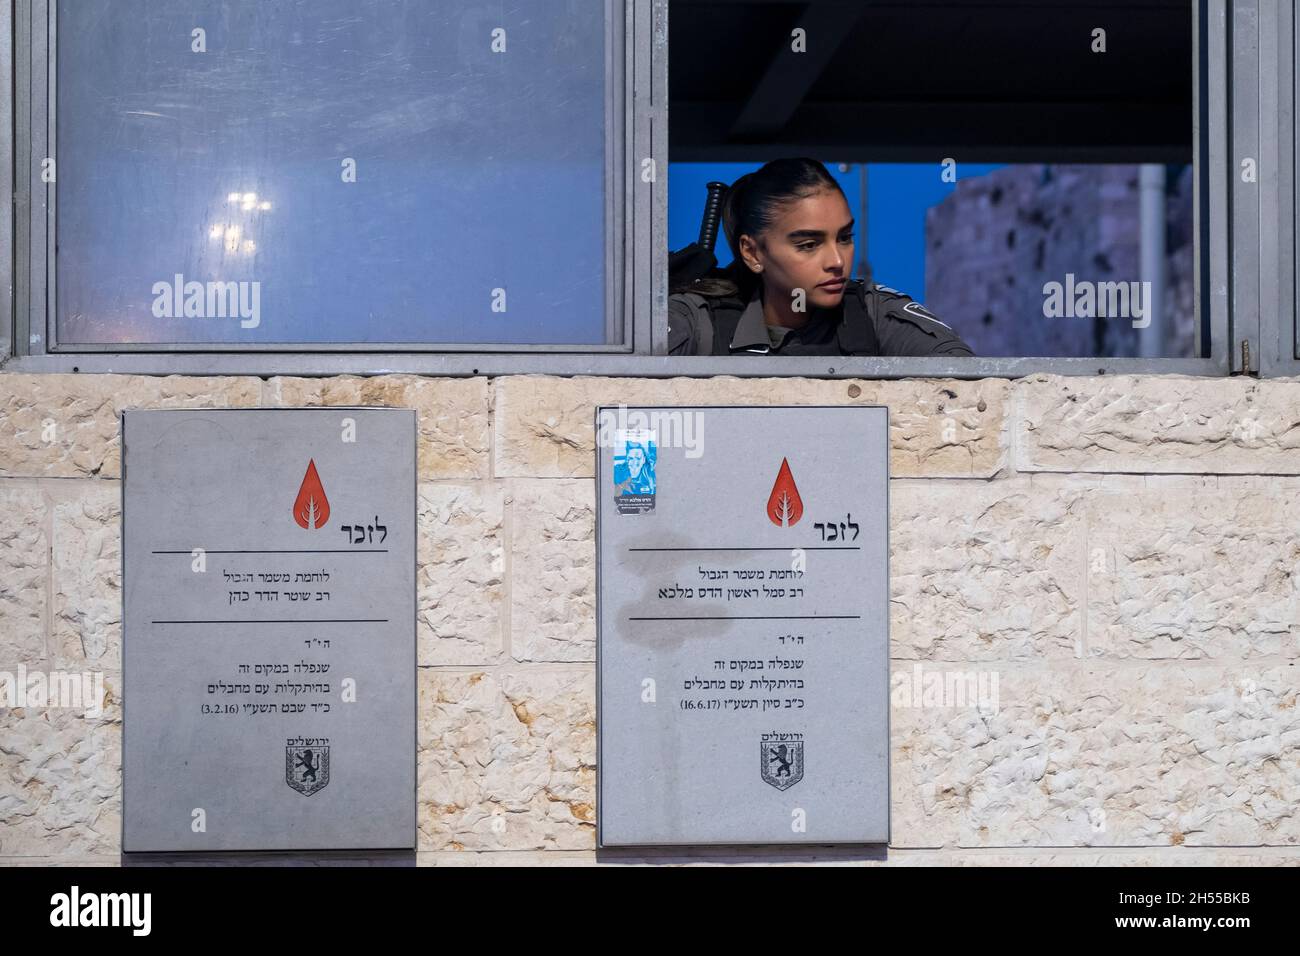 An Israeli policewoman stands guard inside a security post with memorial plaques for Border Policewomen Hadar Cohen and Hadas Malka who were murdered by Palestinians on two different occasions outside Nablus Gate or Bab al-Amud also called Damascus gate at the northern edge of the Ottoman walls surrounding the old city of Jerusalem Israel Stock Photo